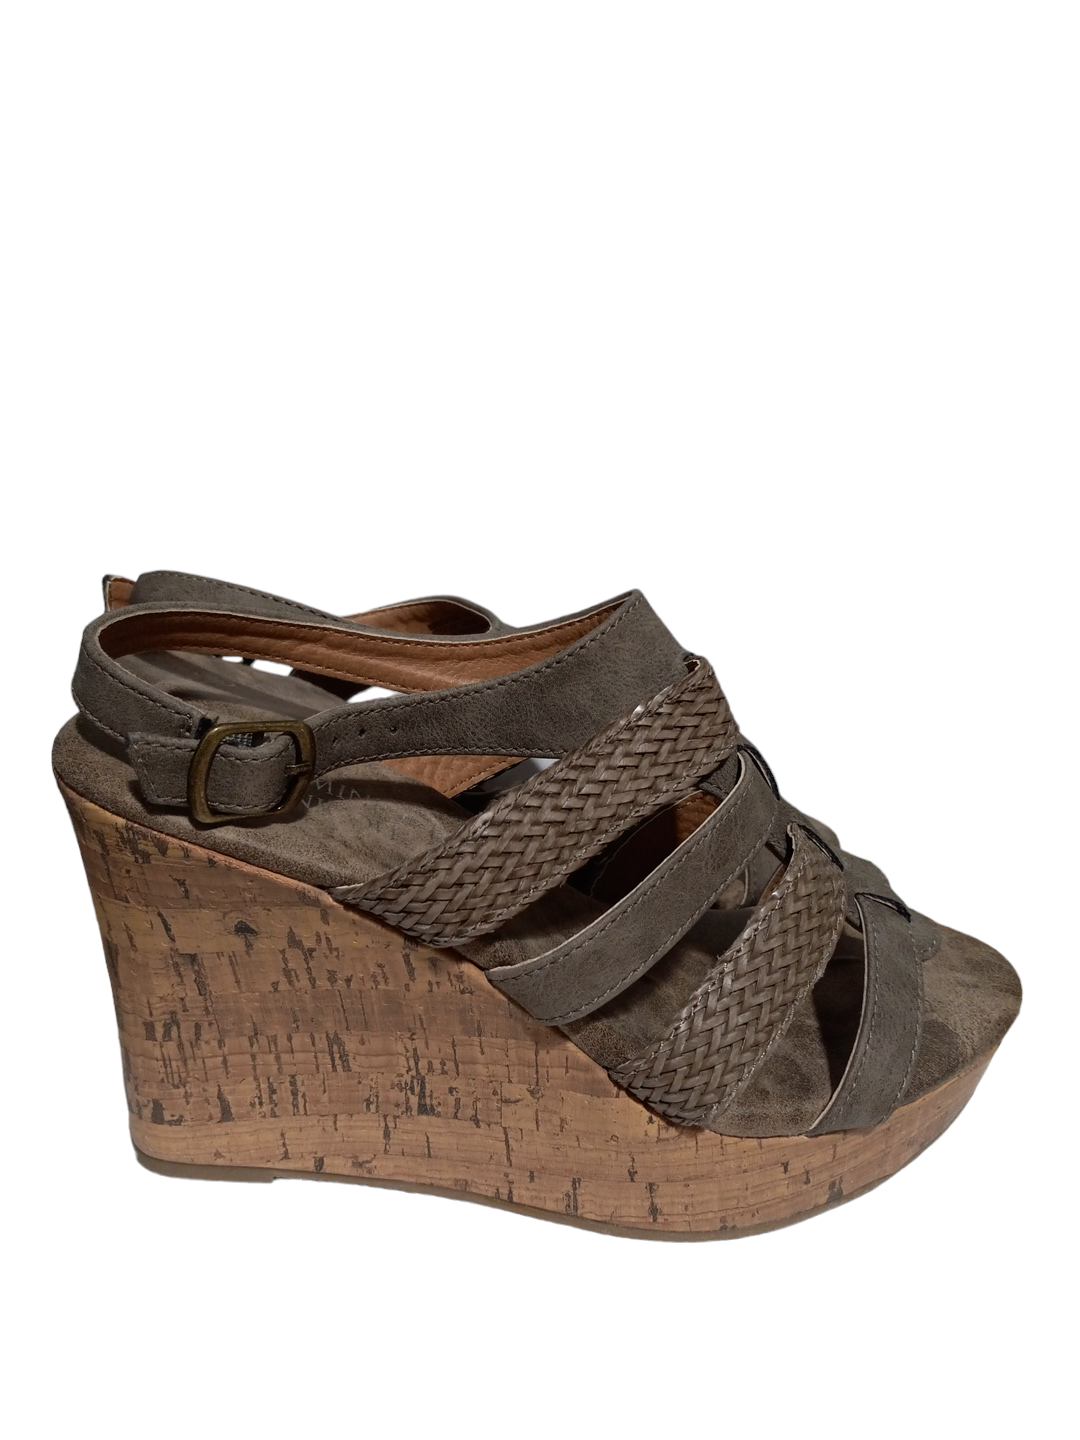 Taupe Sandals Heels Wedge Clothes Mentor, Size 8